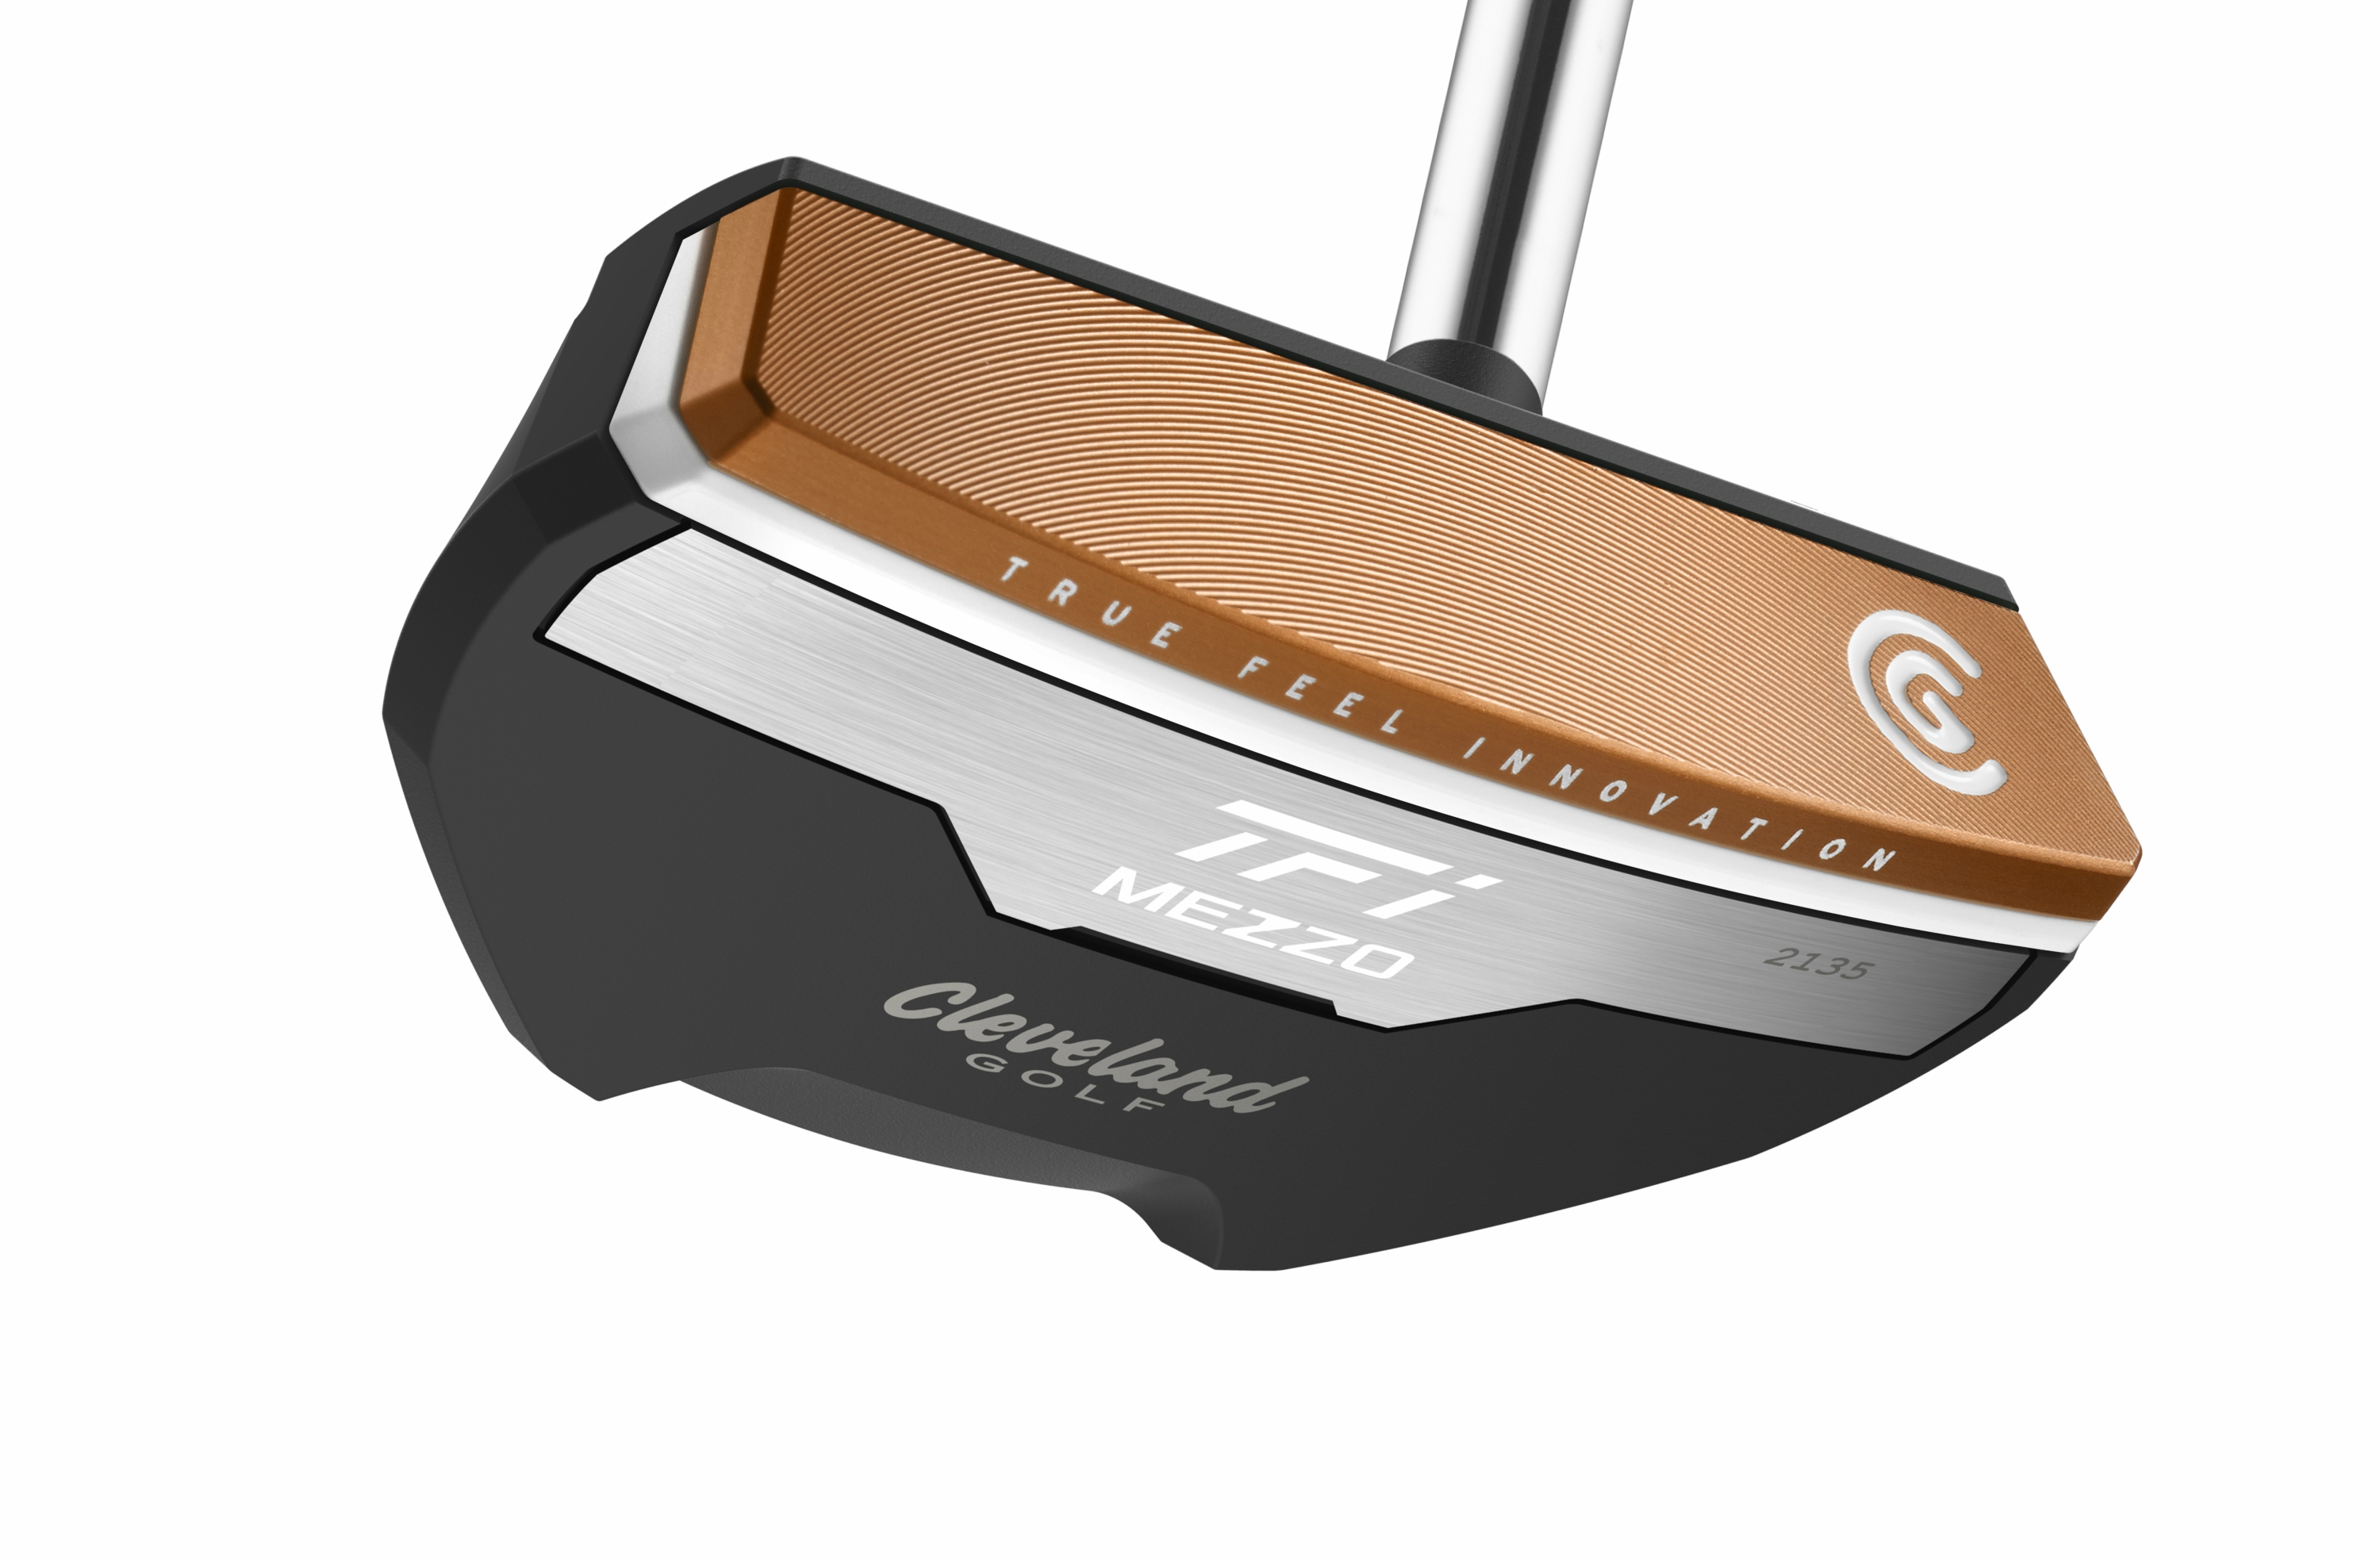 Cleveland reveals new TFi 2135 mallet putters